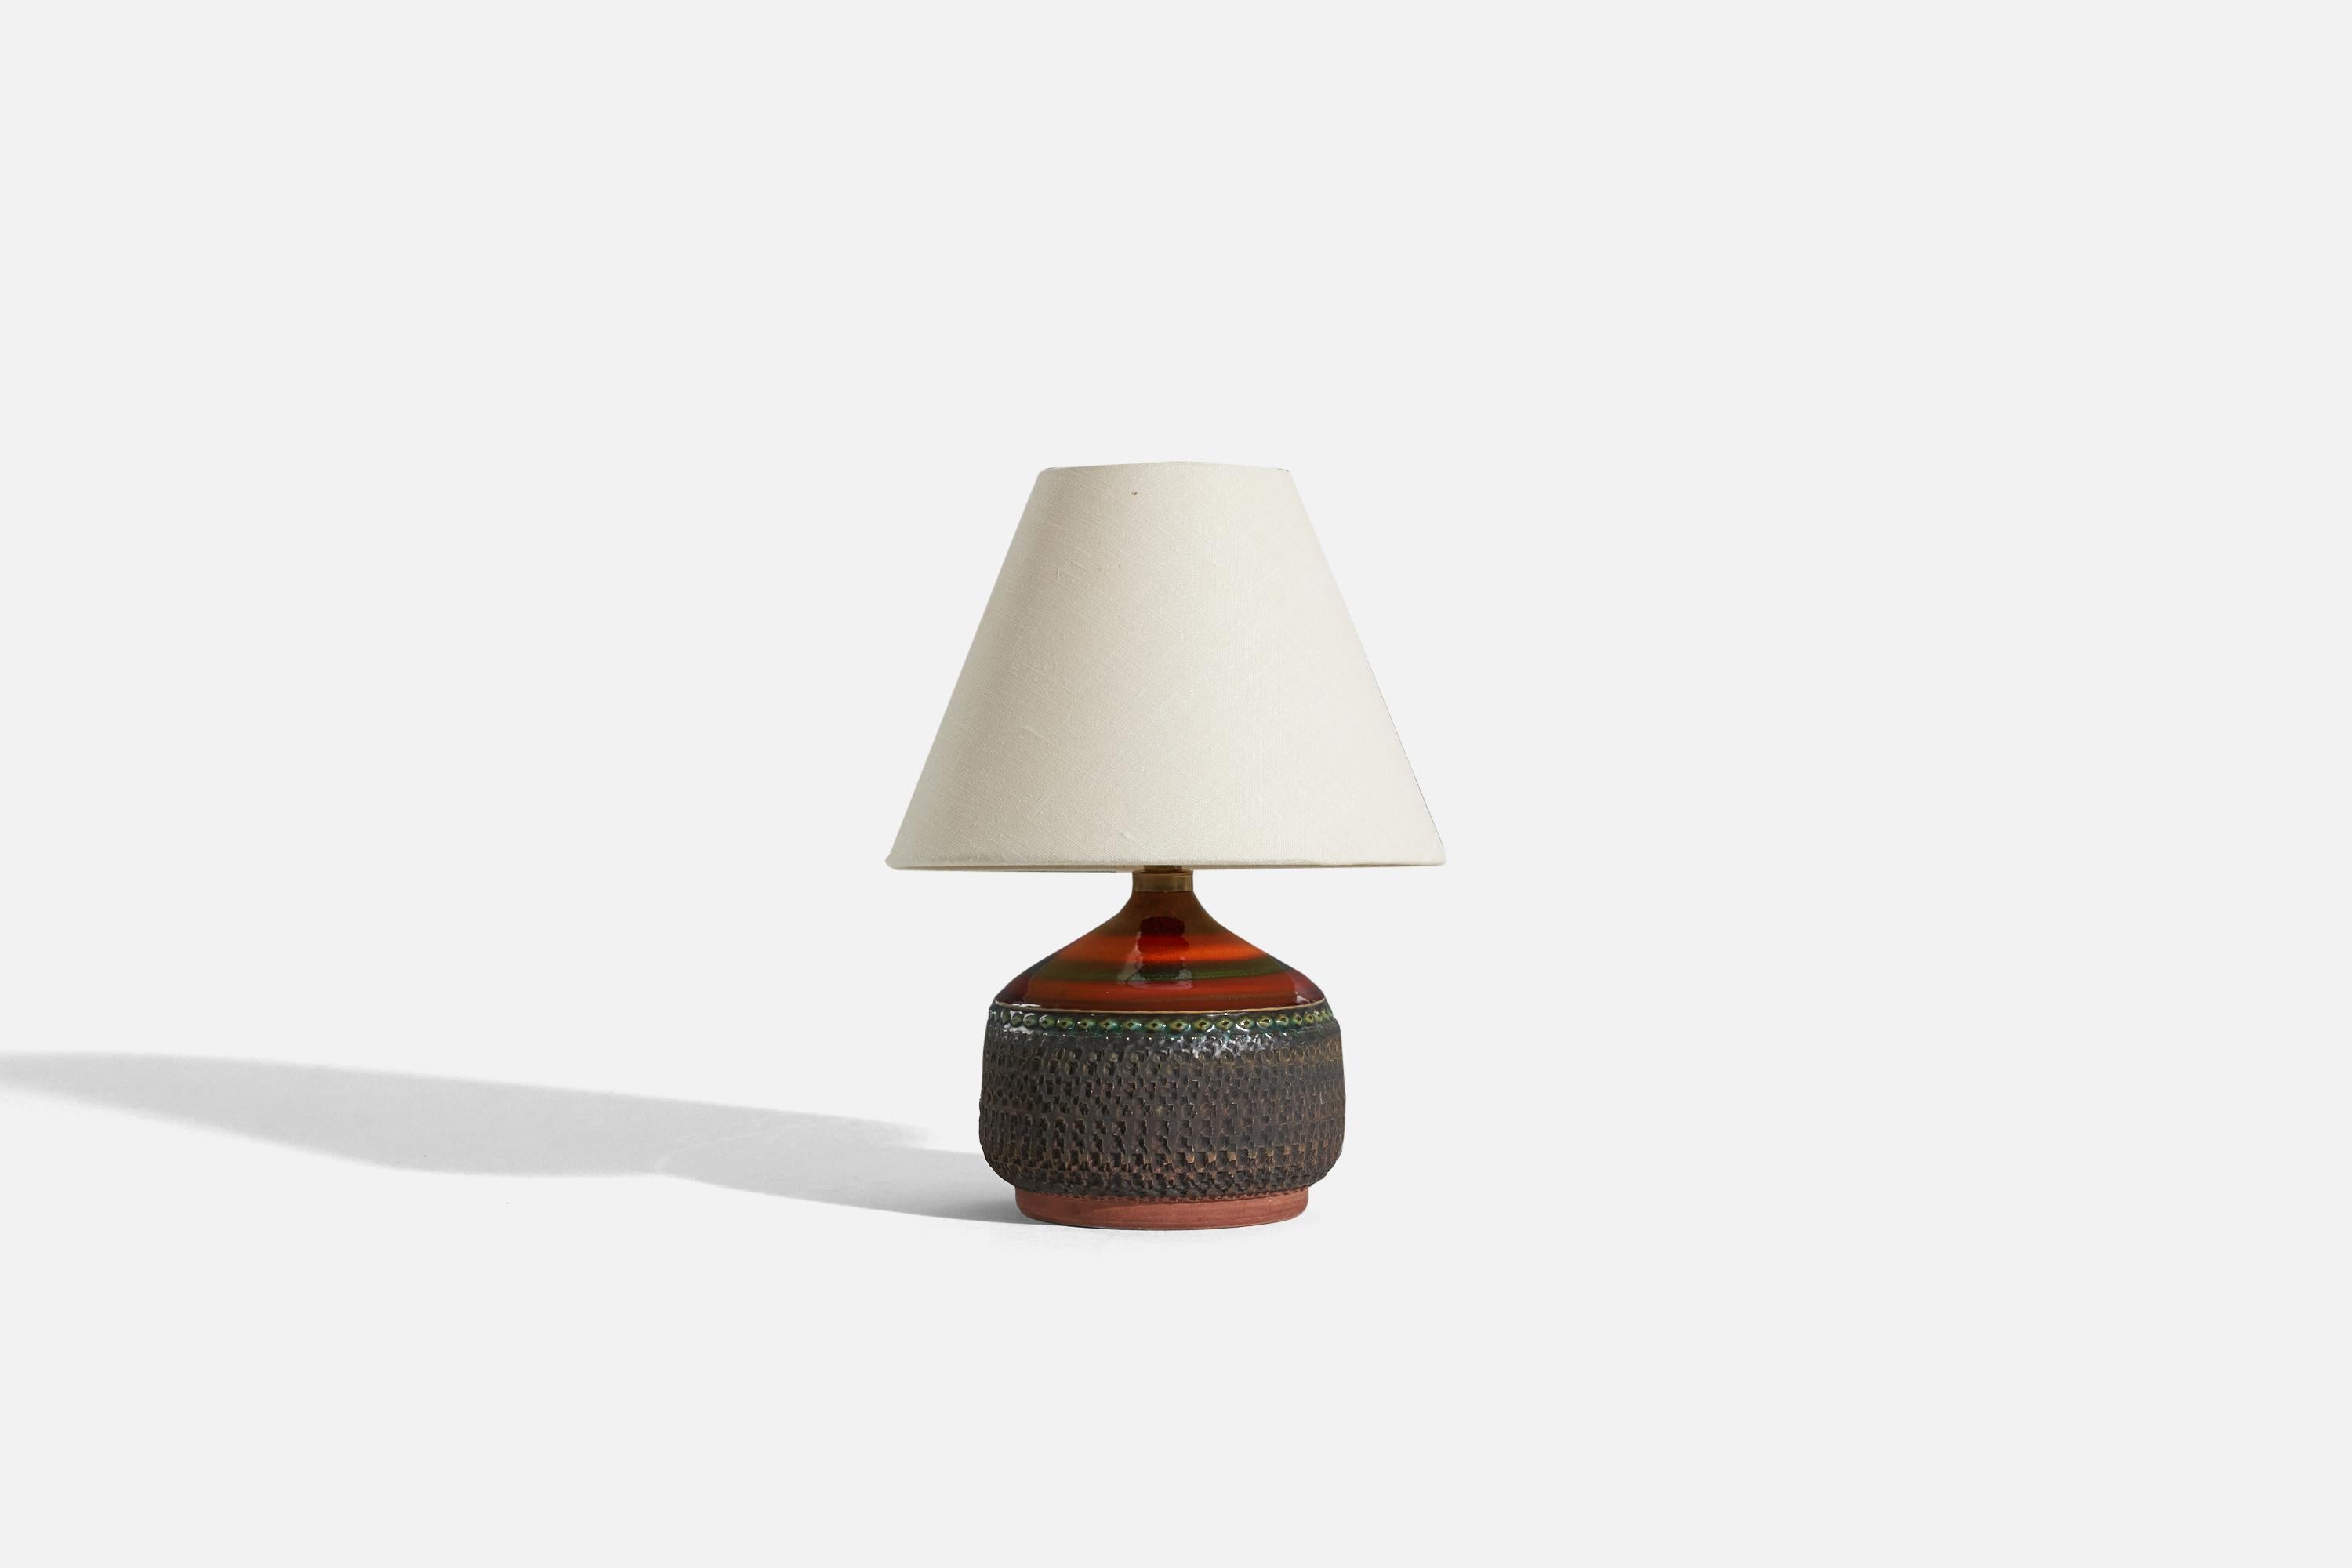 A glazed stoneware table lamp, designed and produced by Klase Höganäs, Sweden, 1960s.

Sold without lampshade. 
Dimensions of Lamp (inches) : 7.5625 x 5.125 x 5.125 (H x W x D)
Dimensions of Shade (inches) : 4 x 8.25 x 6.25 (T x B x